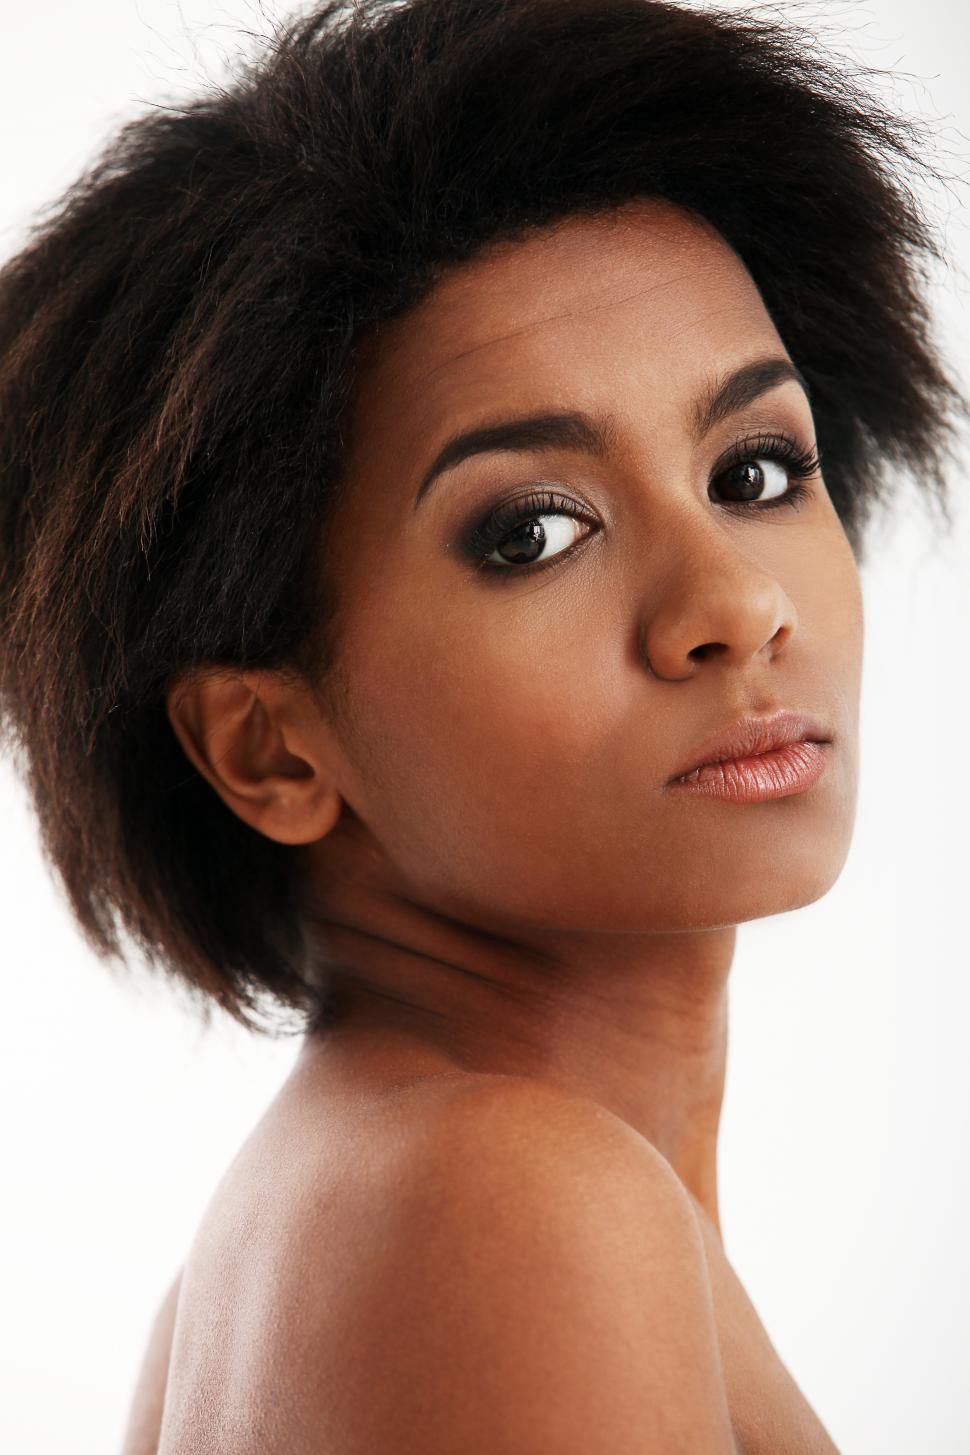 Free Stock Photo of Headshot - young Black woman with short hair